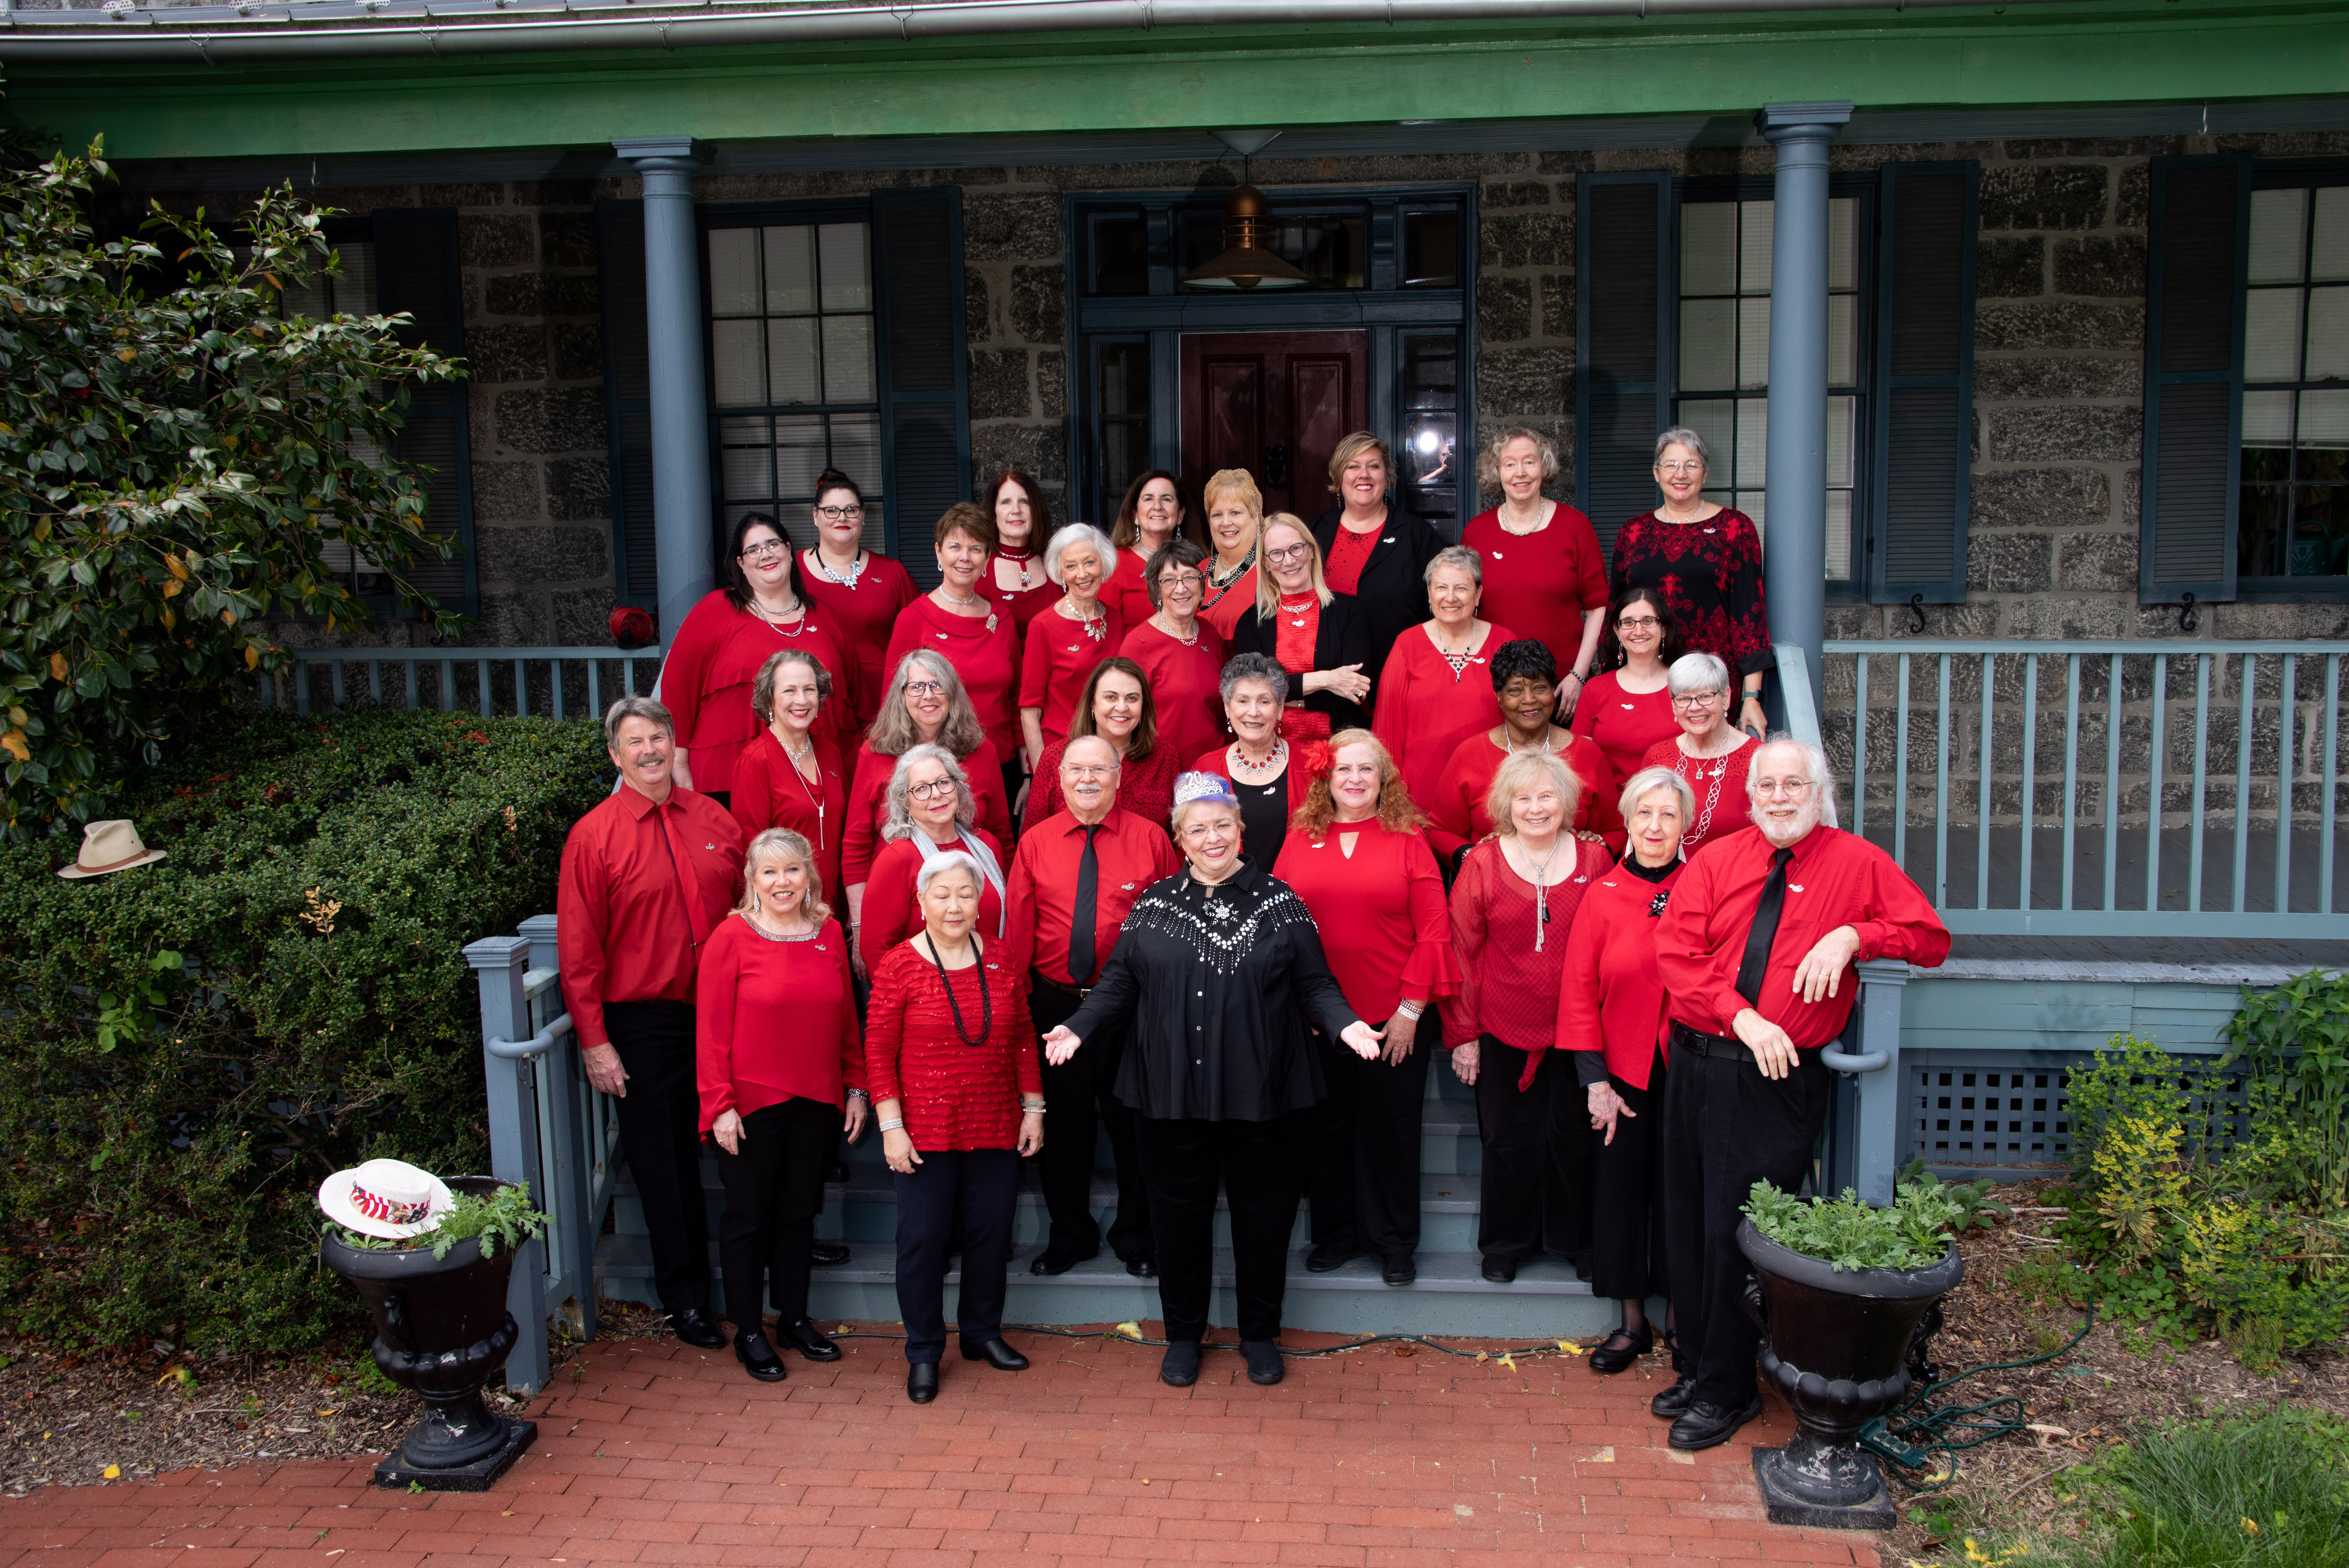 ShowTime Singers standing on a house porch all dressed in red and black